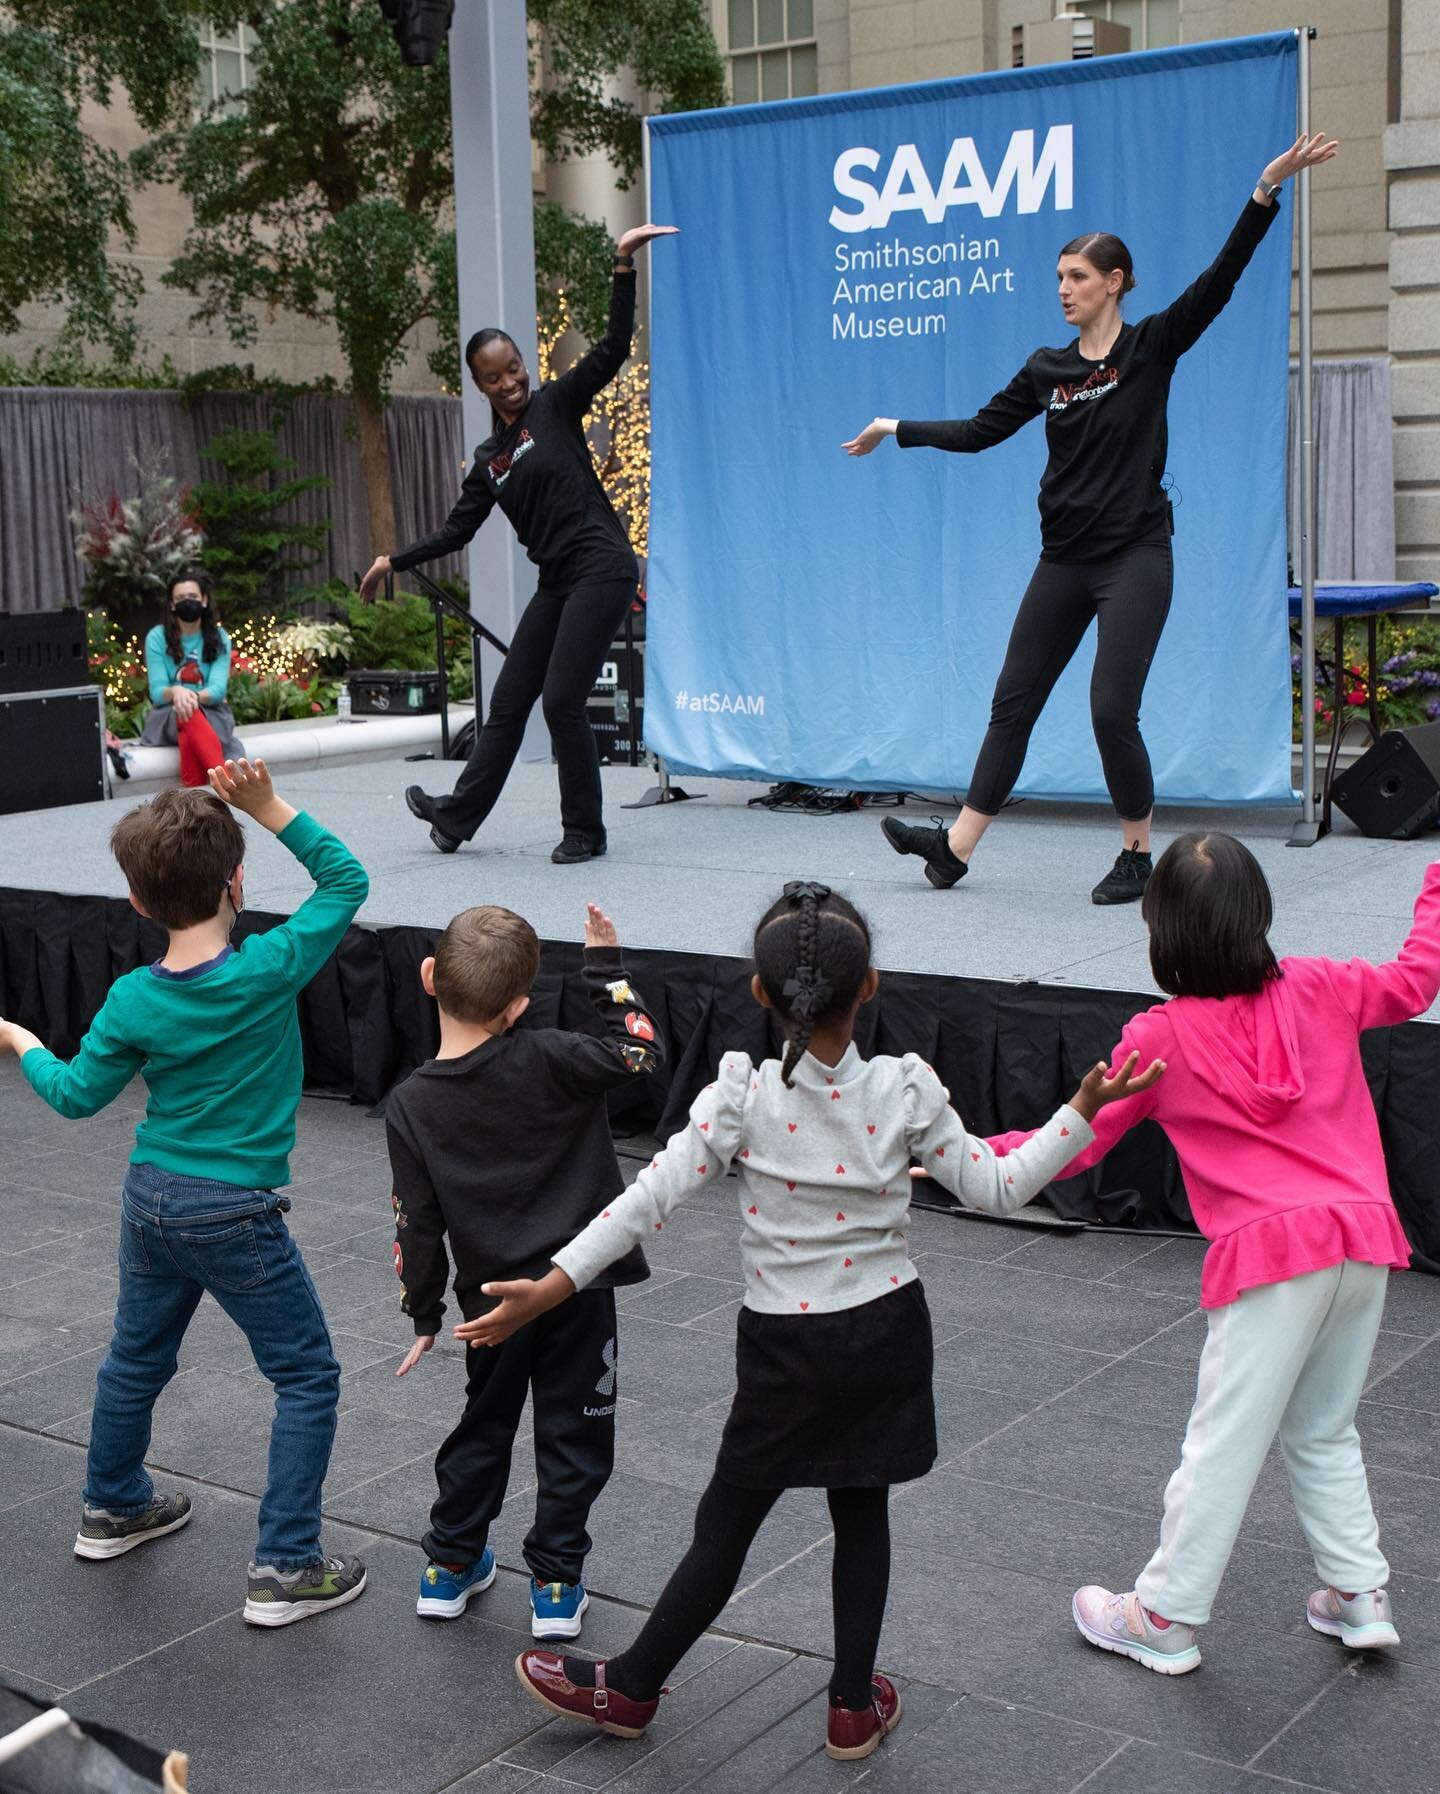 The Winter Holiday Family Celebration at SAAM (Smithsonian American Art Museum) was a blast and a great way to end the year. The Washington Ballet read The Nutcracker and taught the ballet dance moves for part of the story, which was a lot of fun to 